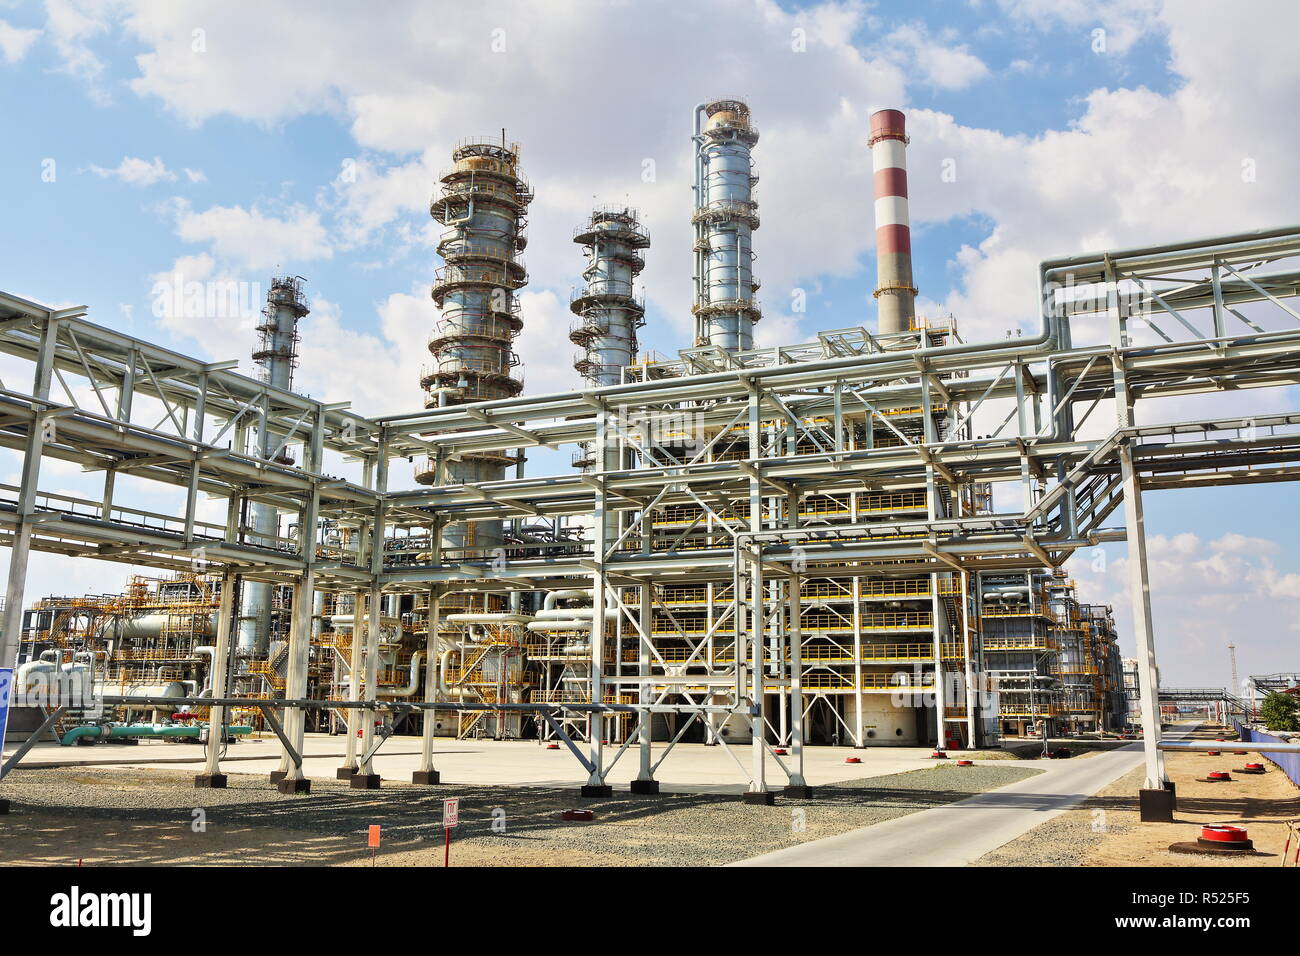 Paramax aromatics unit at KazMunaiGaz 110,000 b/d Atyrau refinery in Western Kazakhstan, built and launched in 2014 as part of refinery modernization. Stock Photo